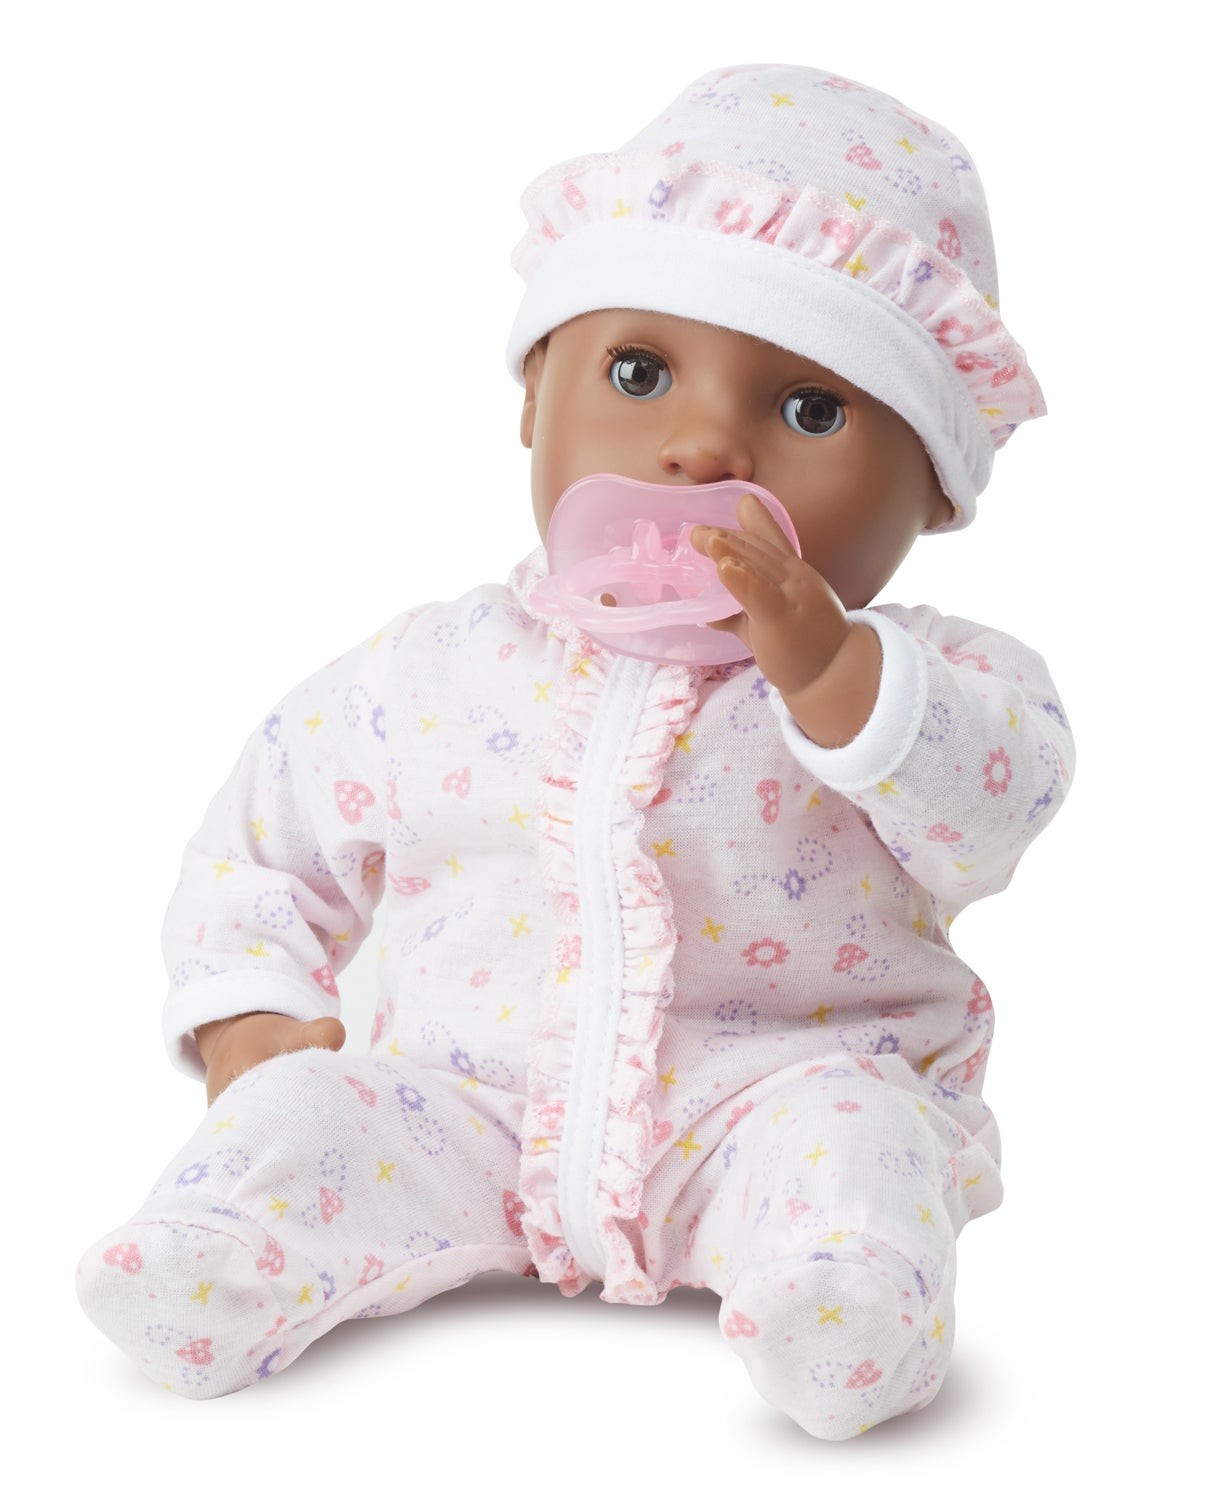 Gabrielle 12" Baby Doll Ages 18+ Months